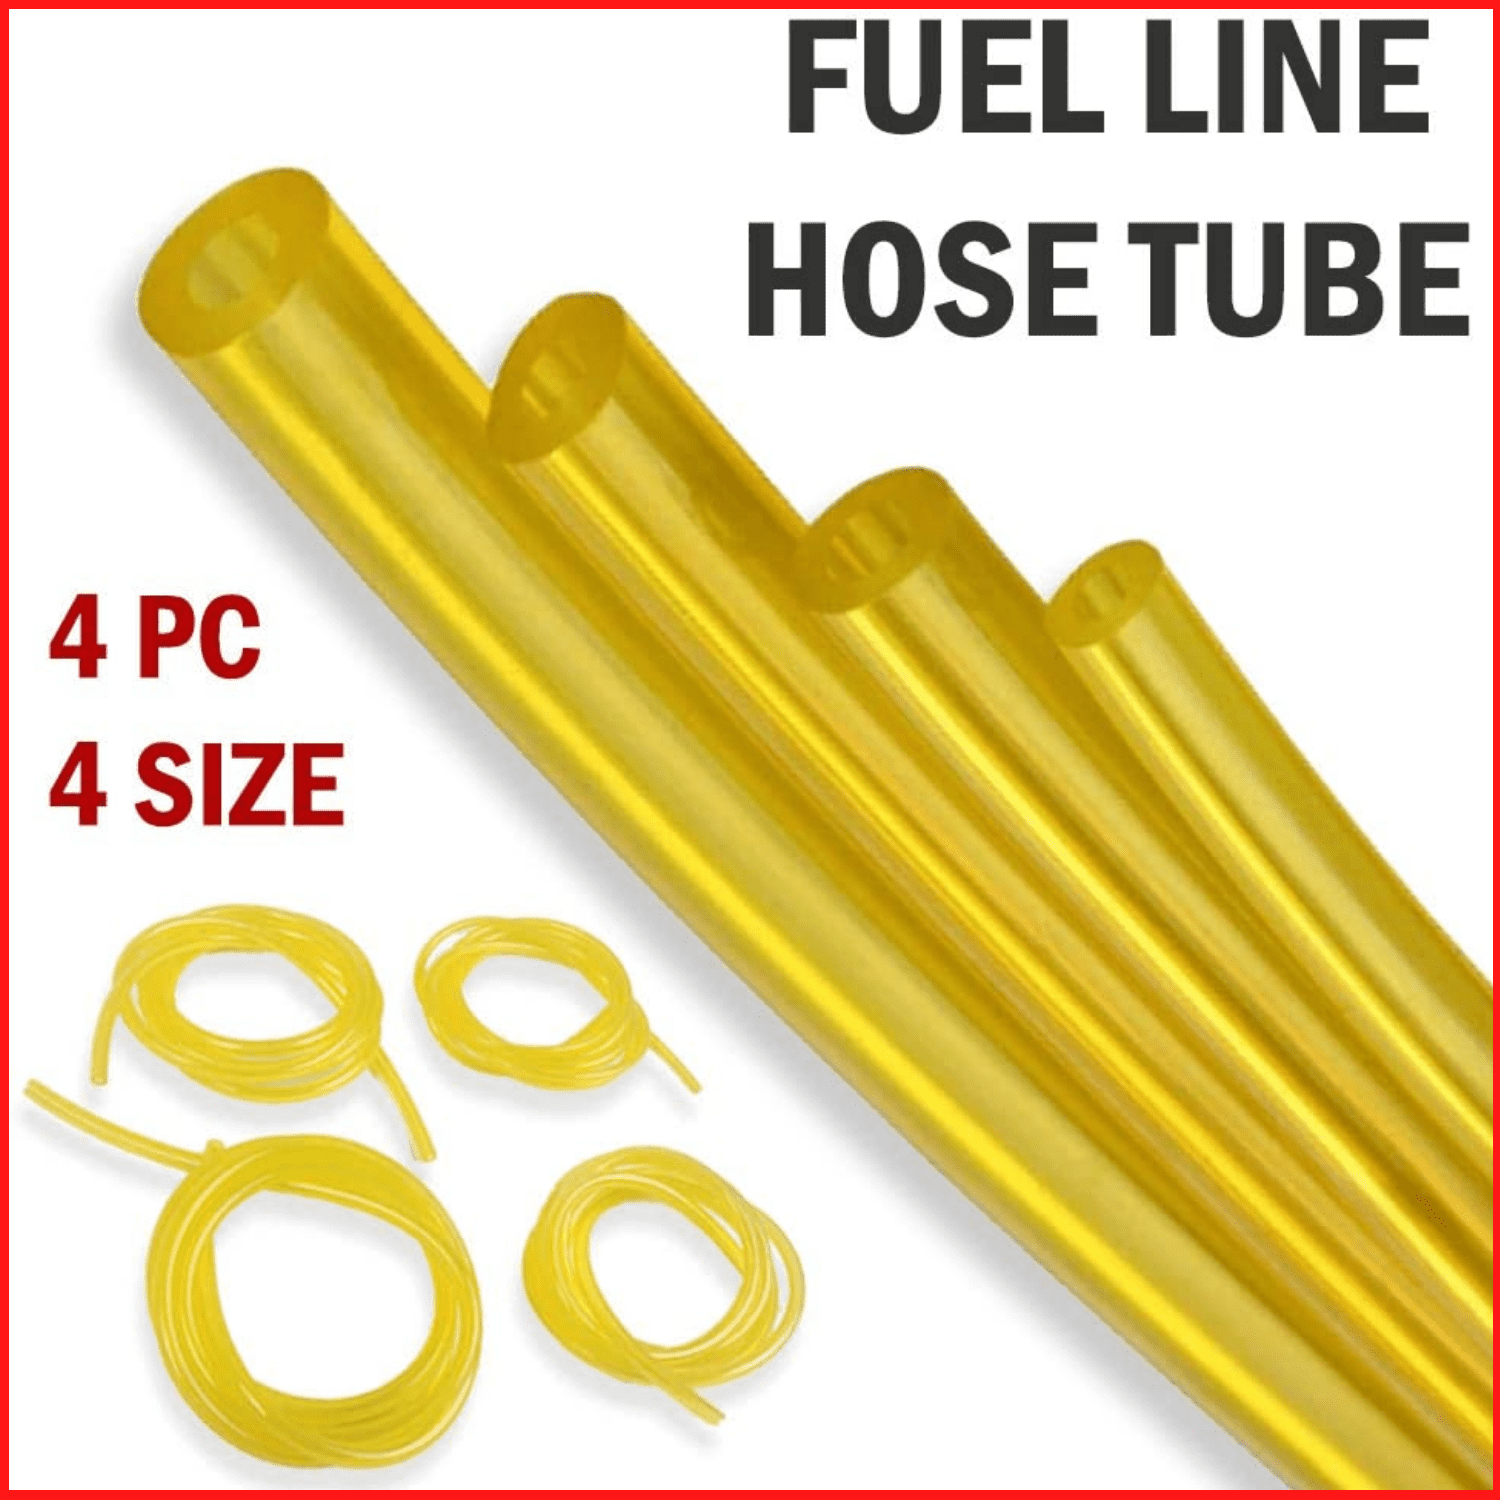 1pc/4pcs Fuel Gas Line Pipe Hose String Trimmer Replacement For Chainsaw Blowers 